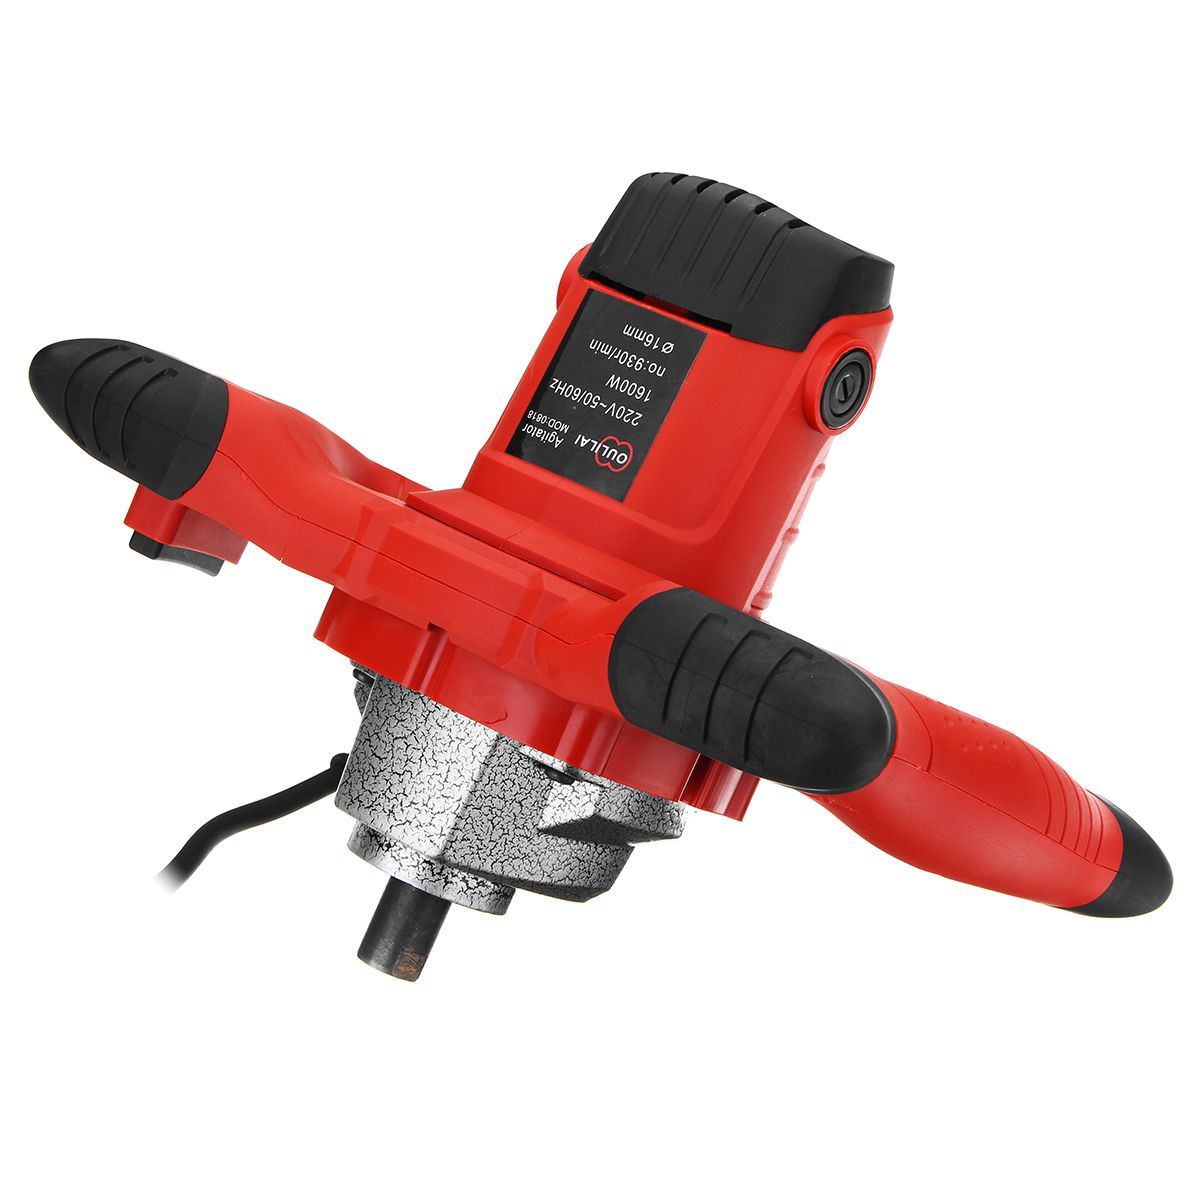 Electric-Mortar-Mixer-1600W-Handheld-Stirrer-Paint-Cement-Grout-Mixing-6-Speed-1240800